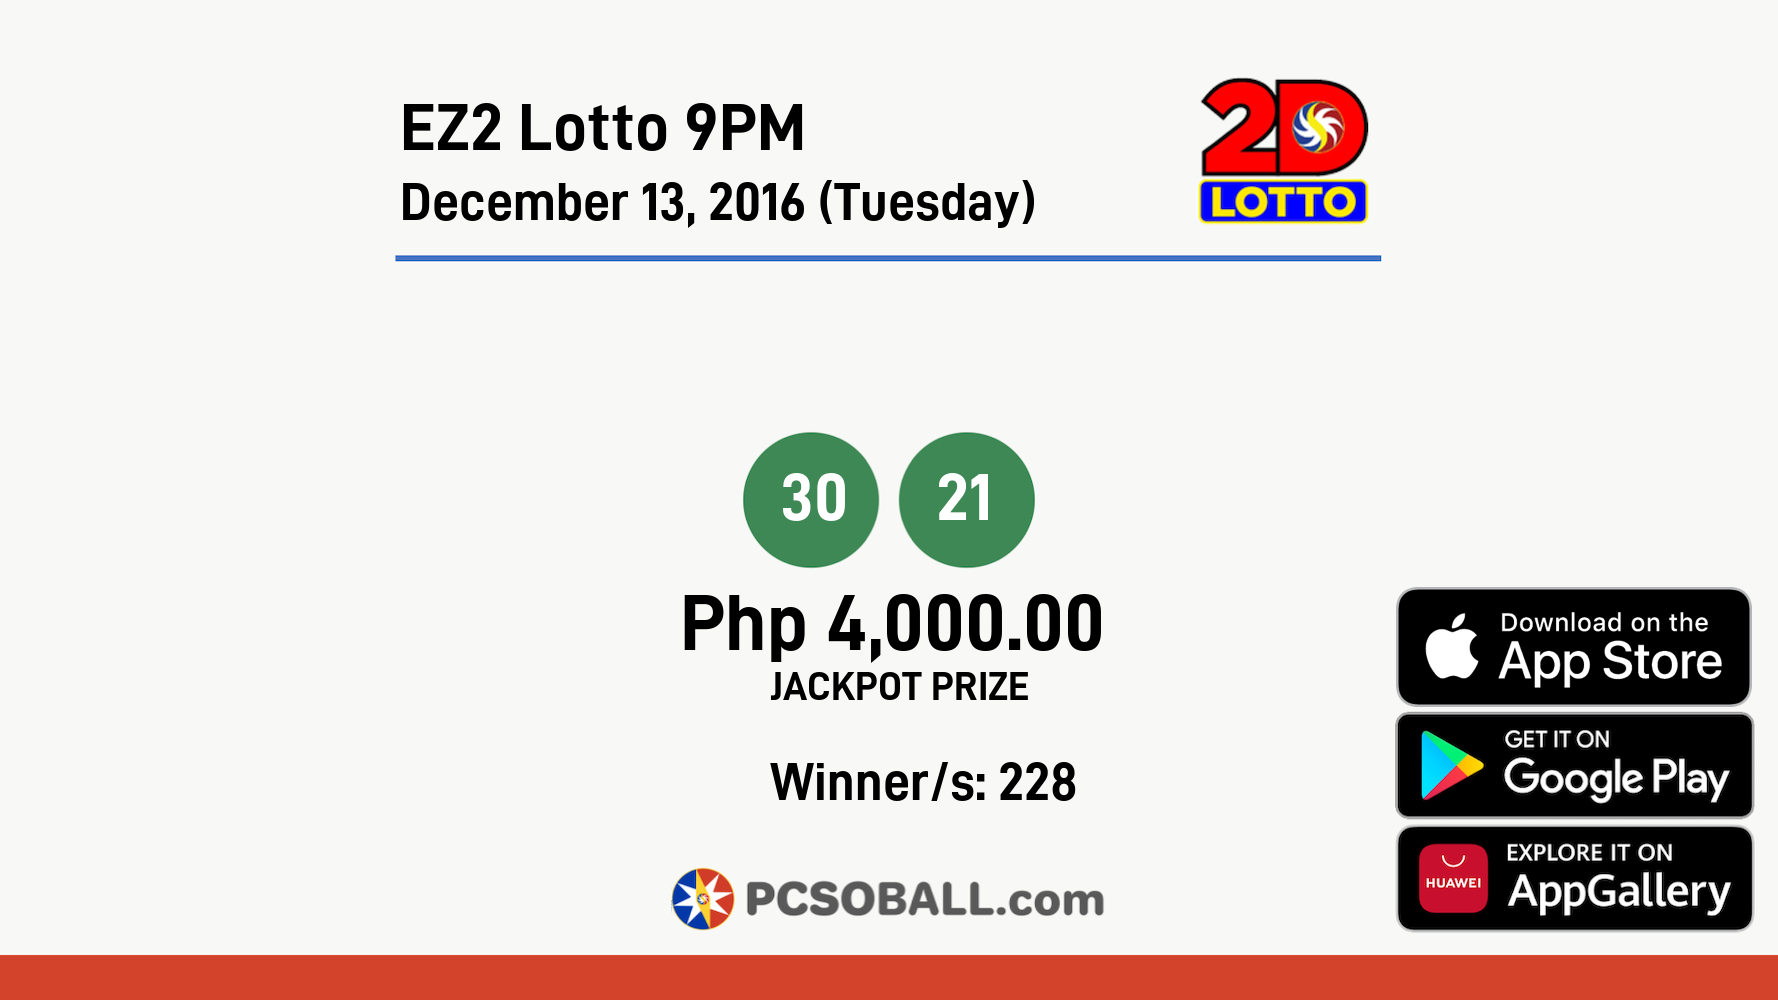 EZ2 Lotto 9PM December 13, 2016 (Tuesday) Result